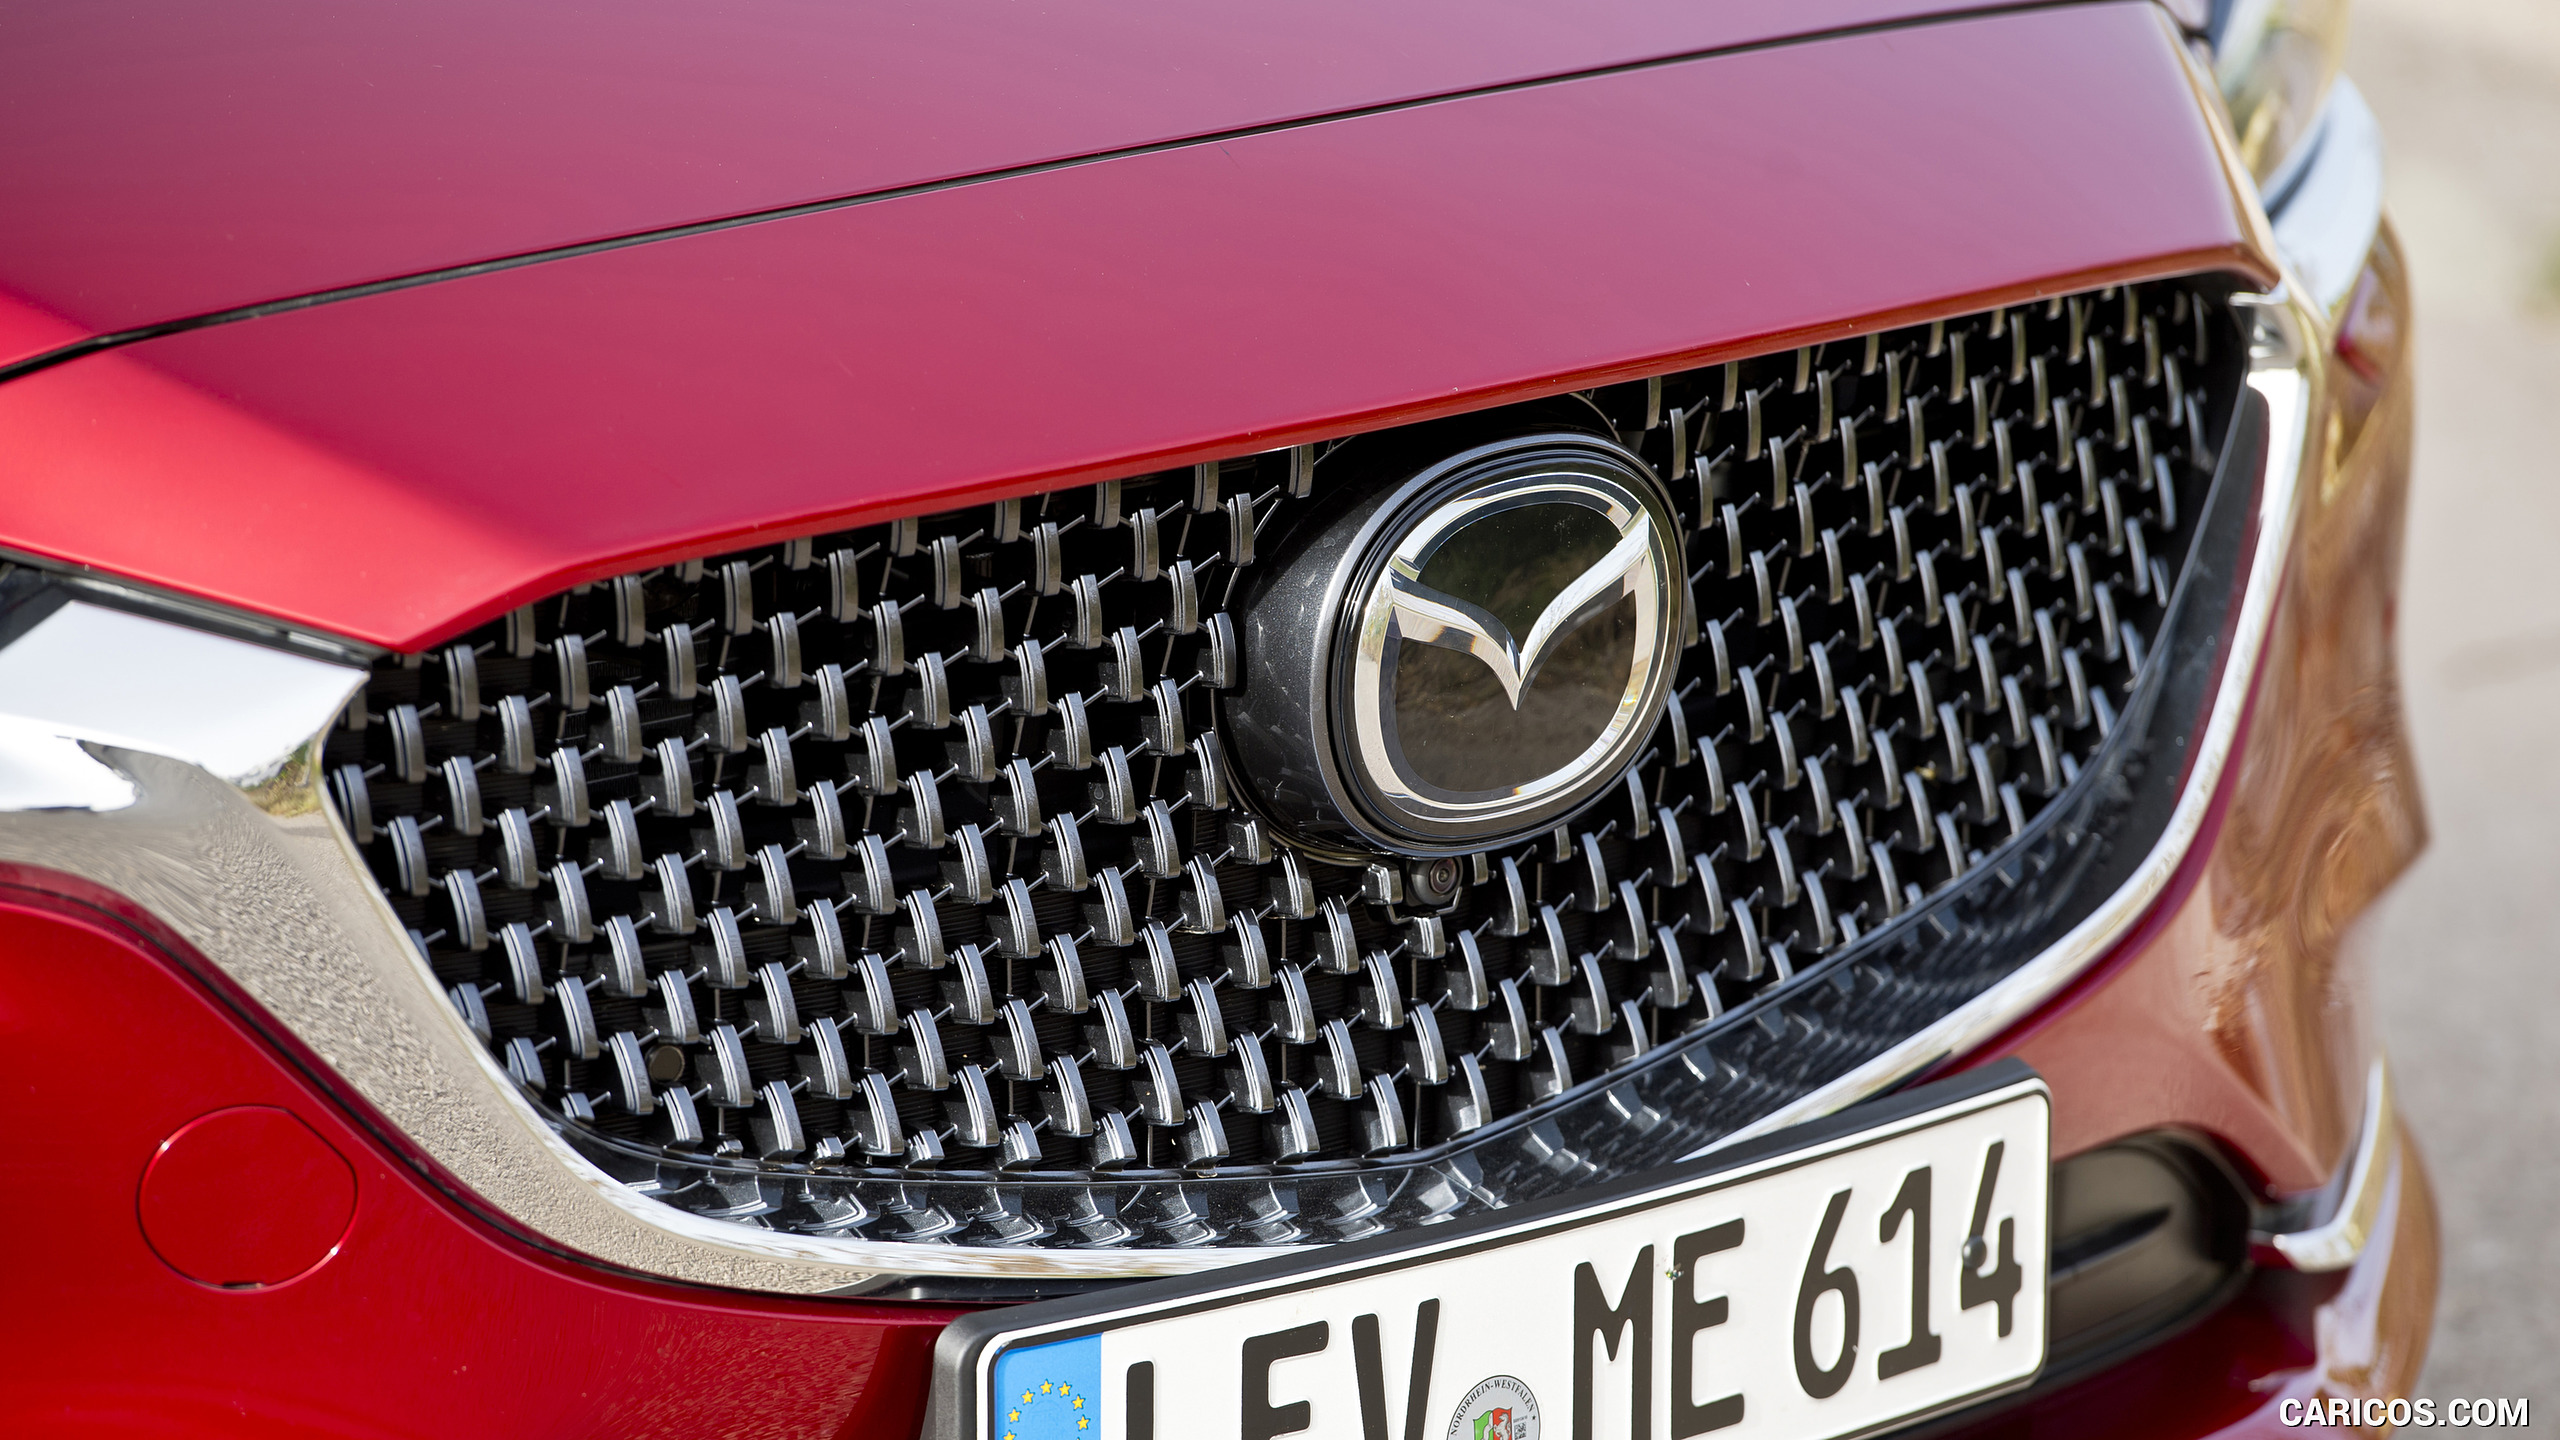 2018 Mazda6 Wagon - Grille, #226 of 235